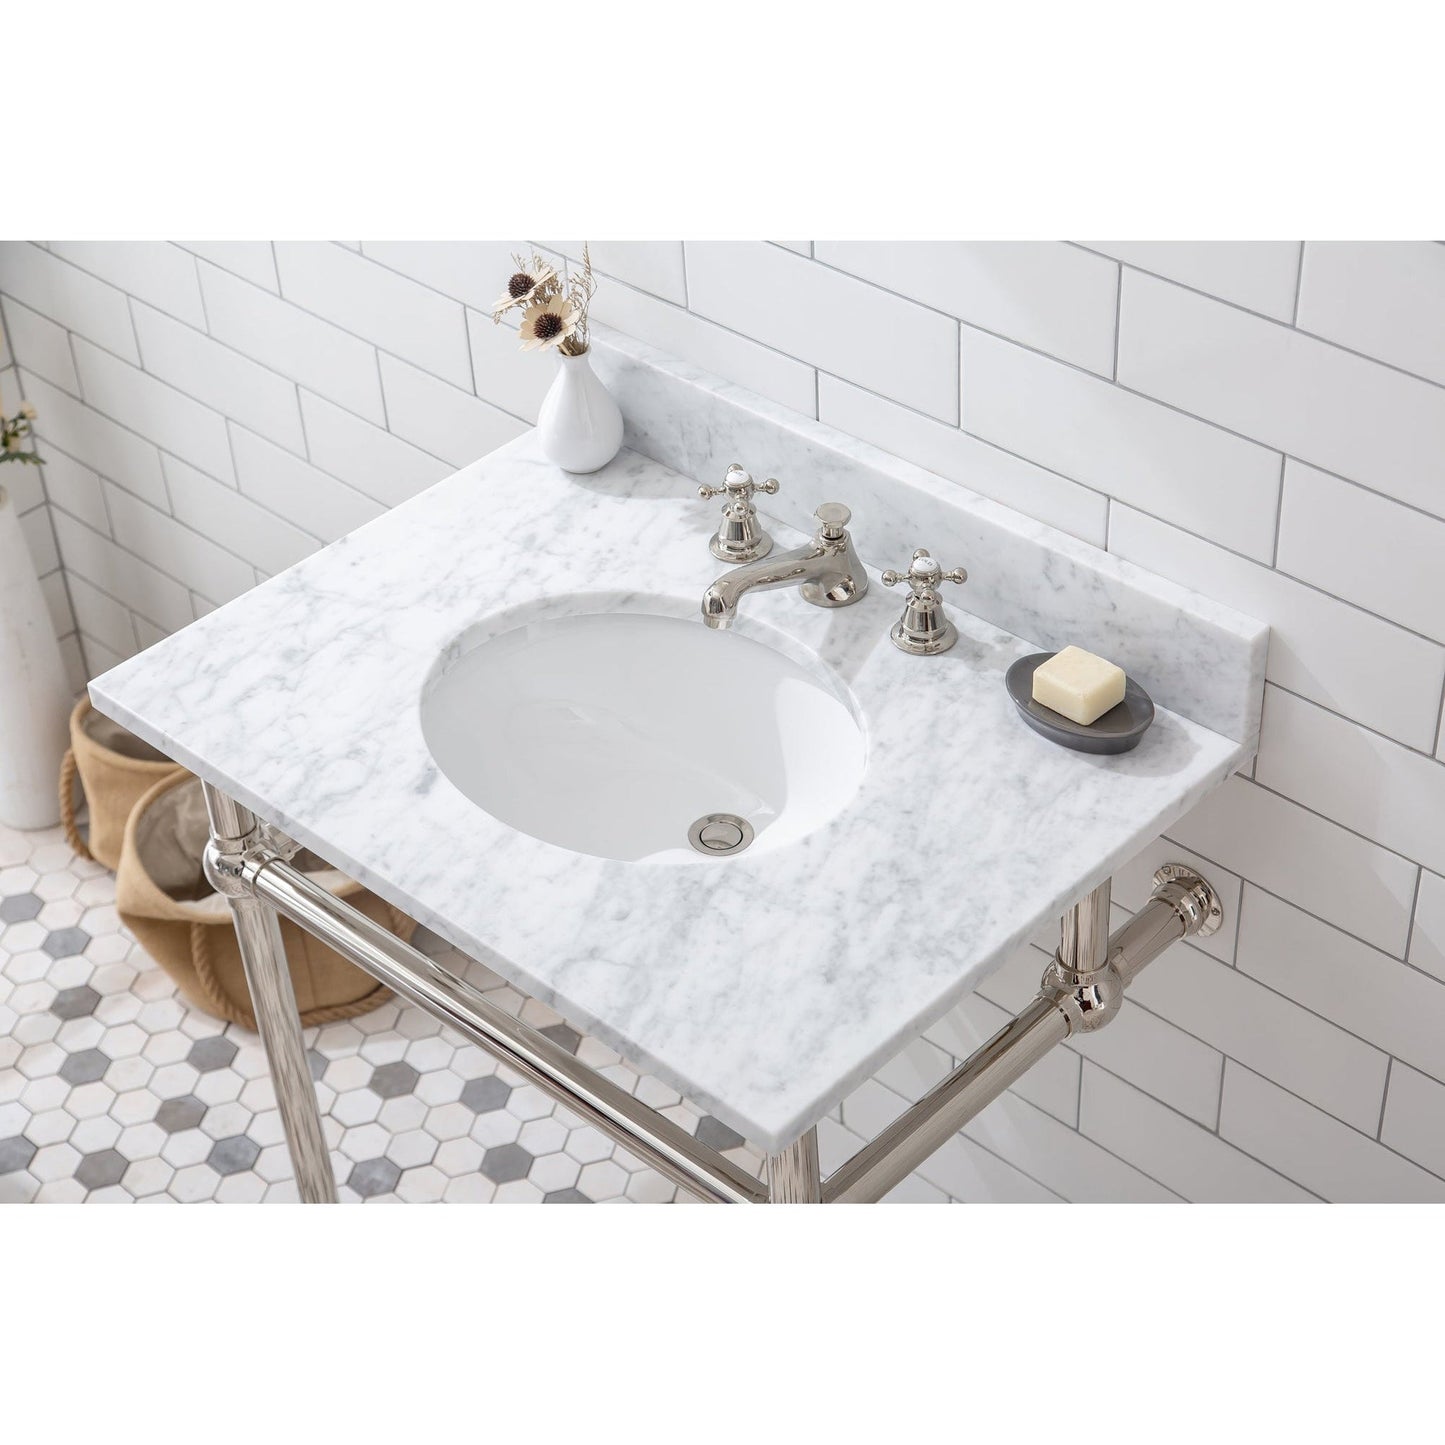 Water Creation Embassy 30" Wide Single Wash Stand, P-Trap, and Counter Top with Basin included in Polished Nickel (PVD) Finish